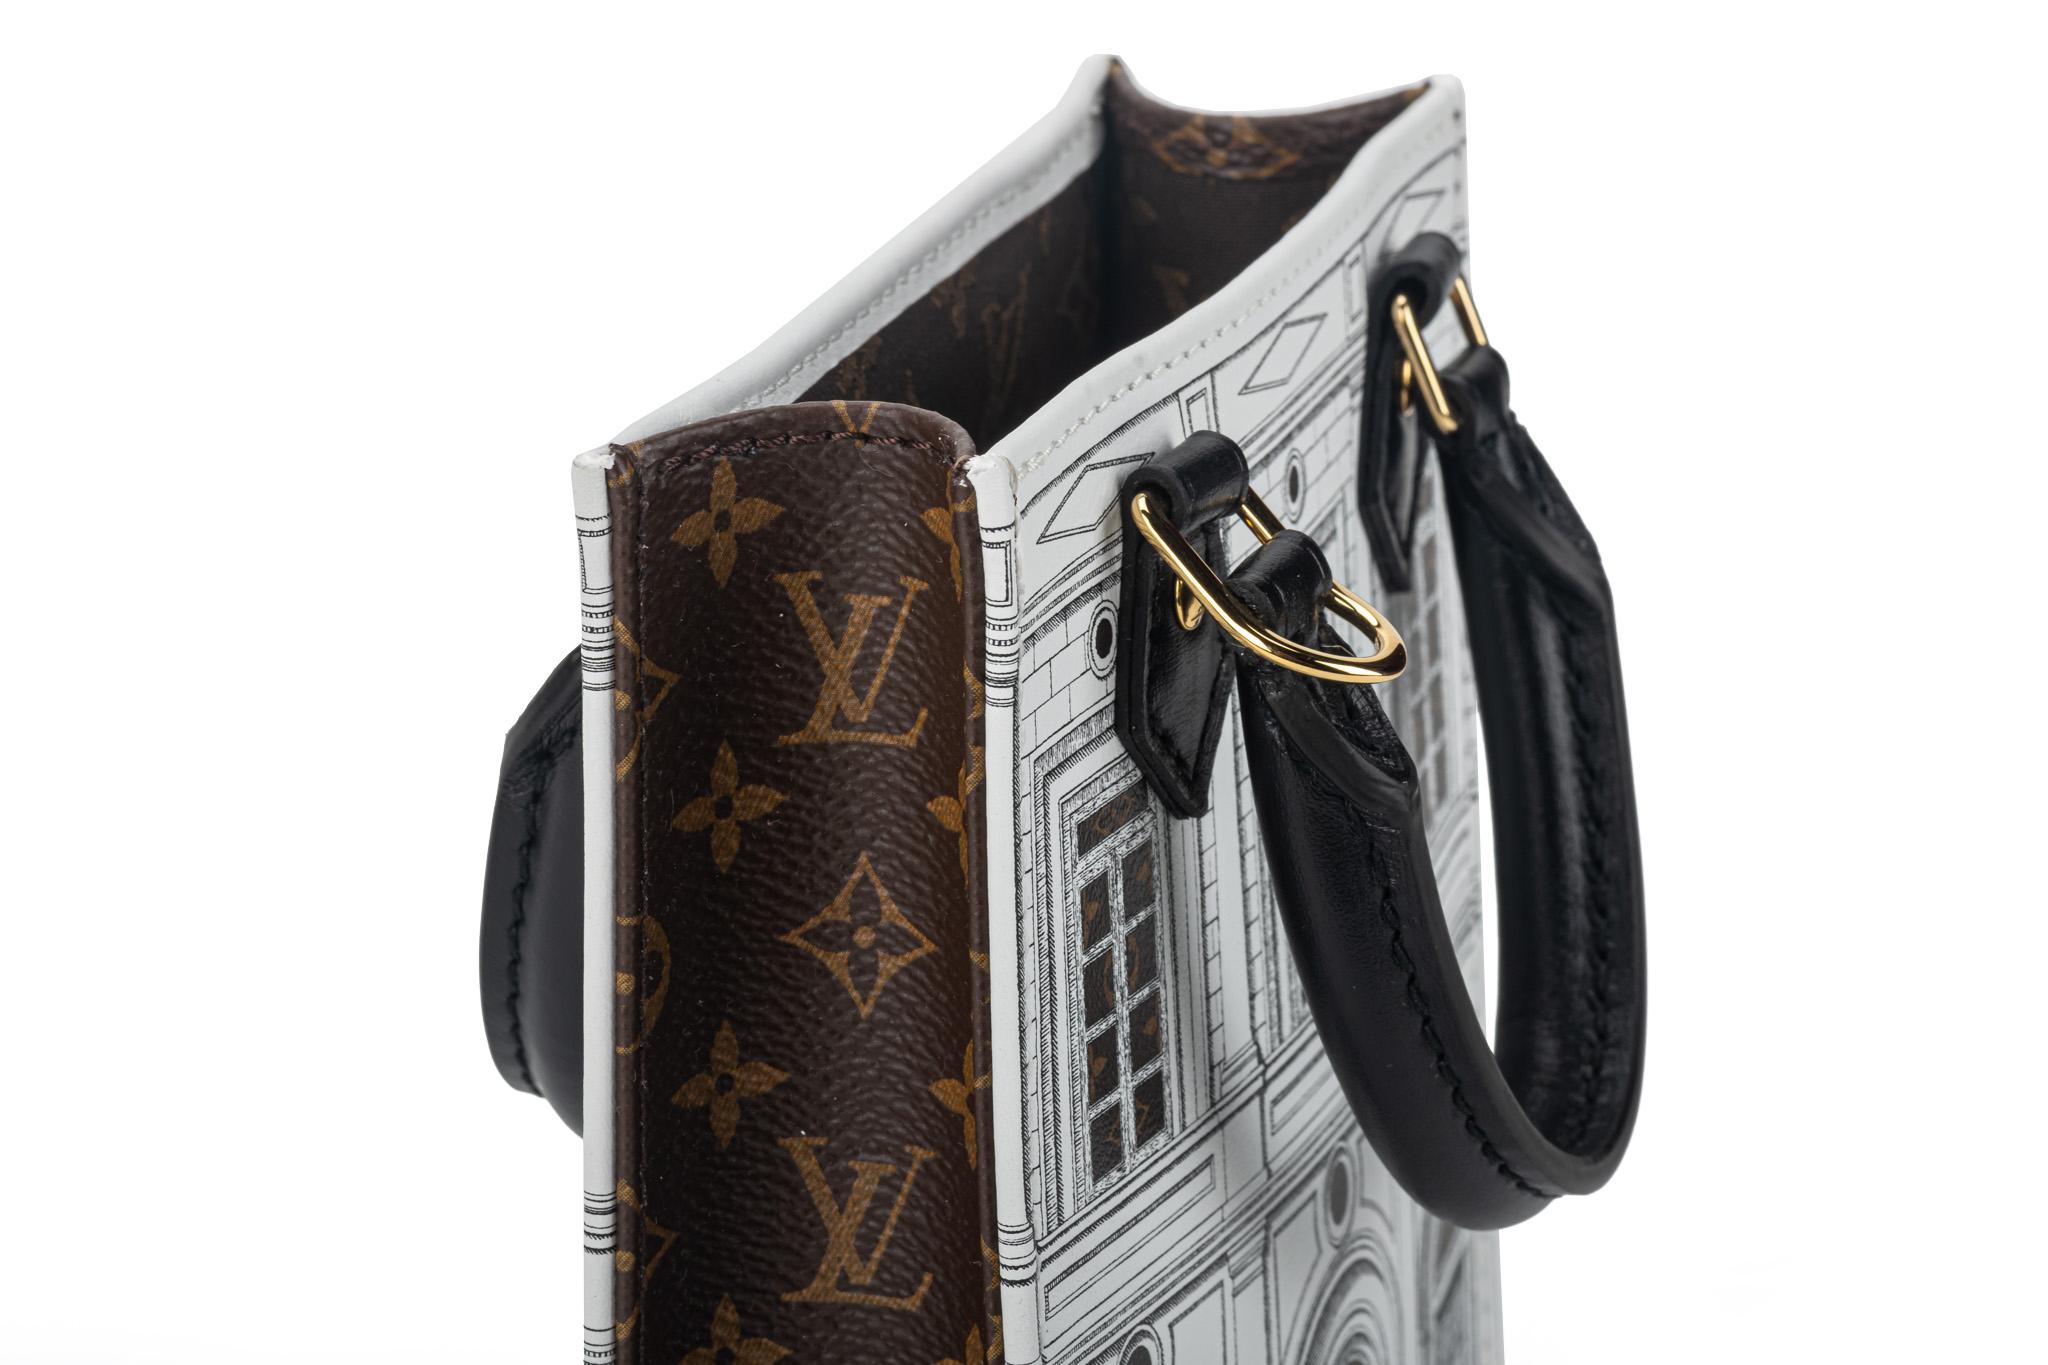 New Louis Vuitton Limited Edition Fornasetti Sac Plat Bag 2